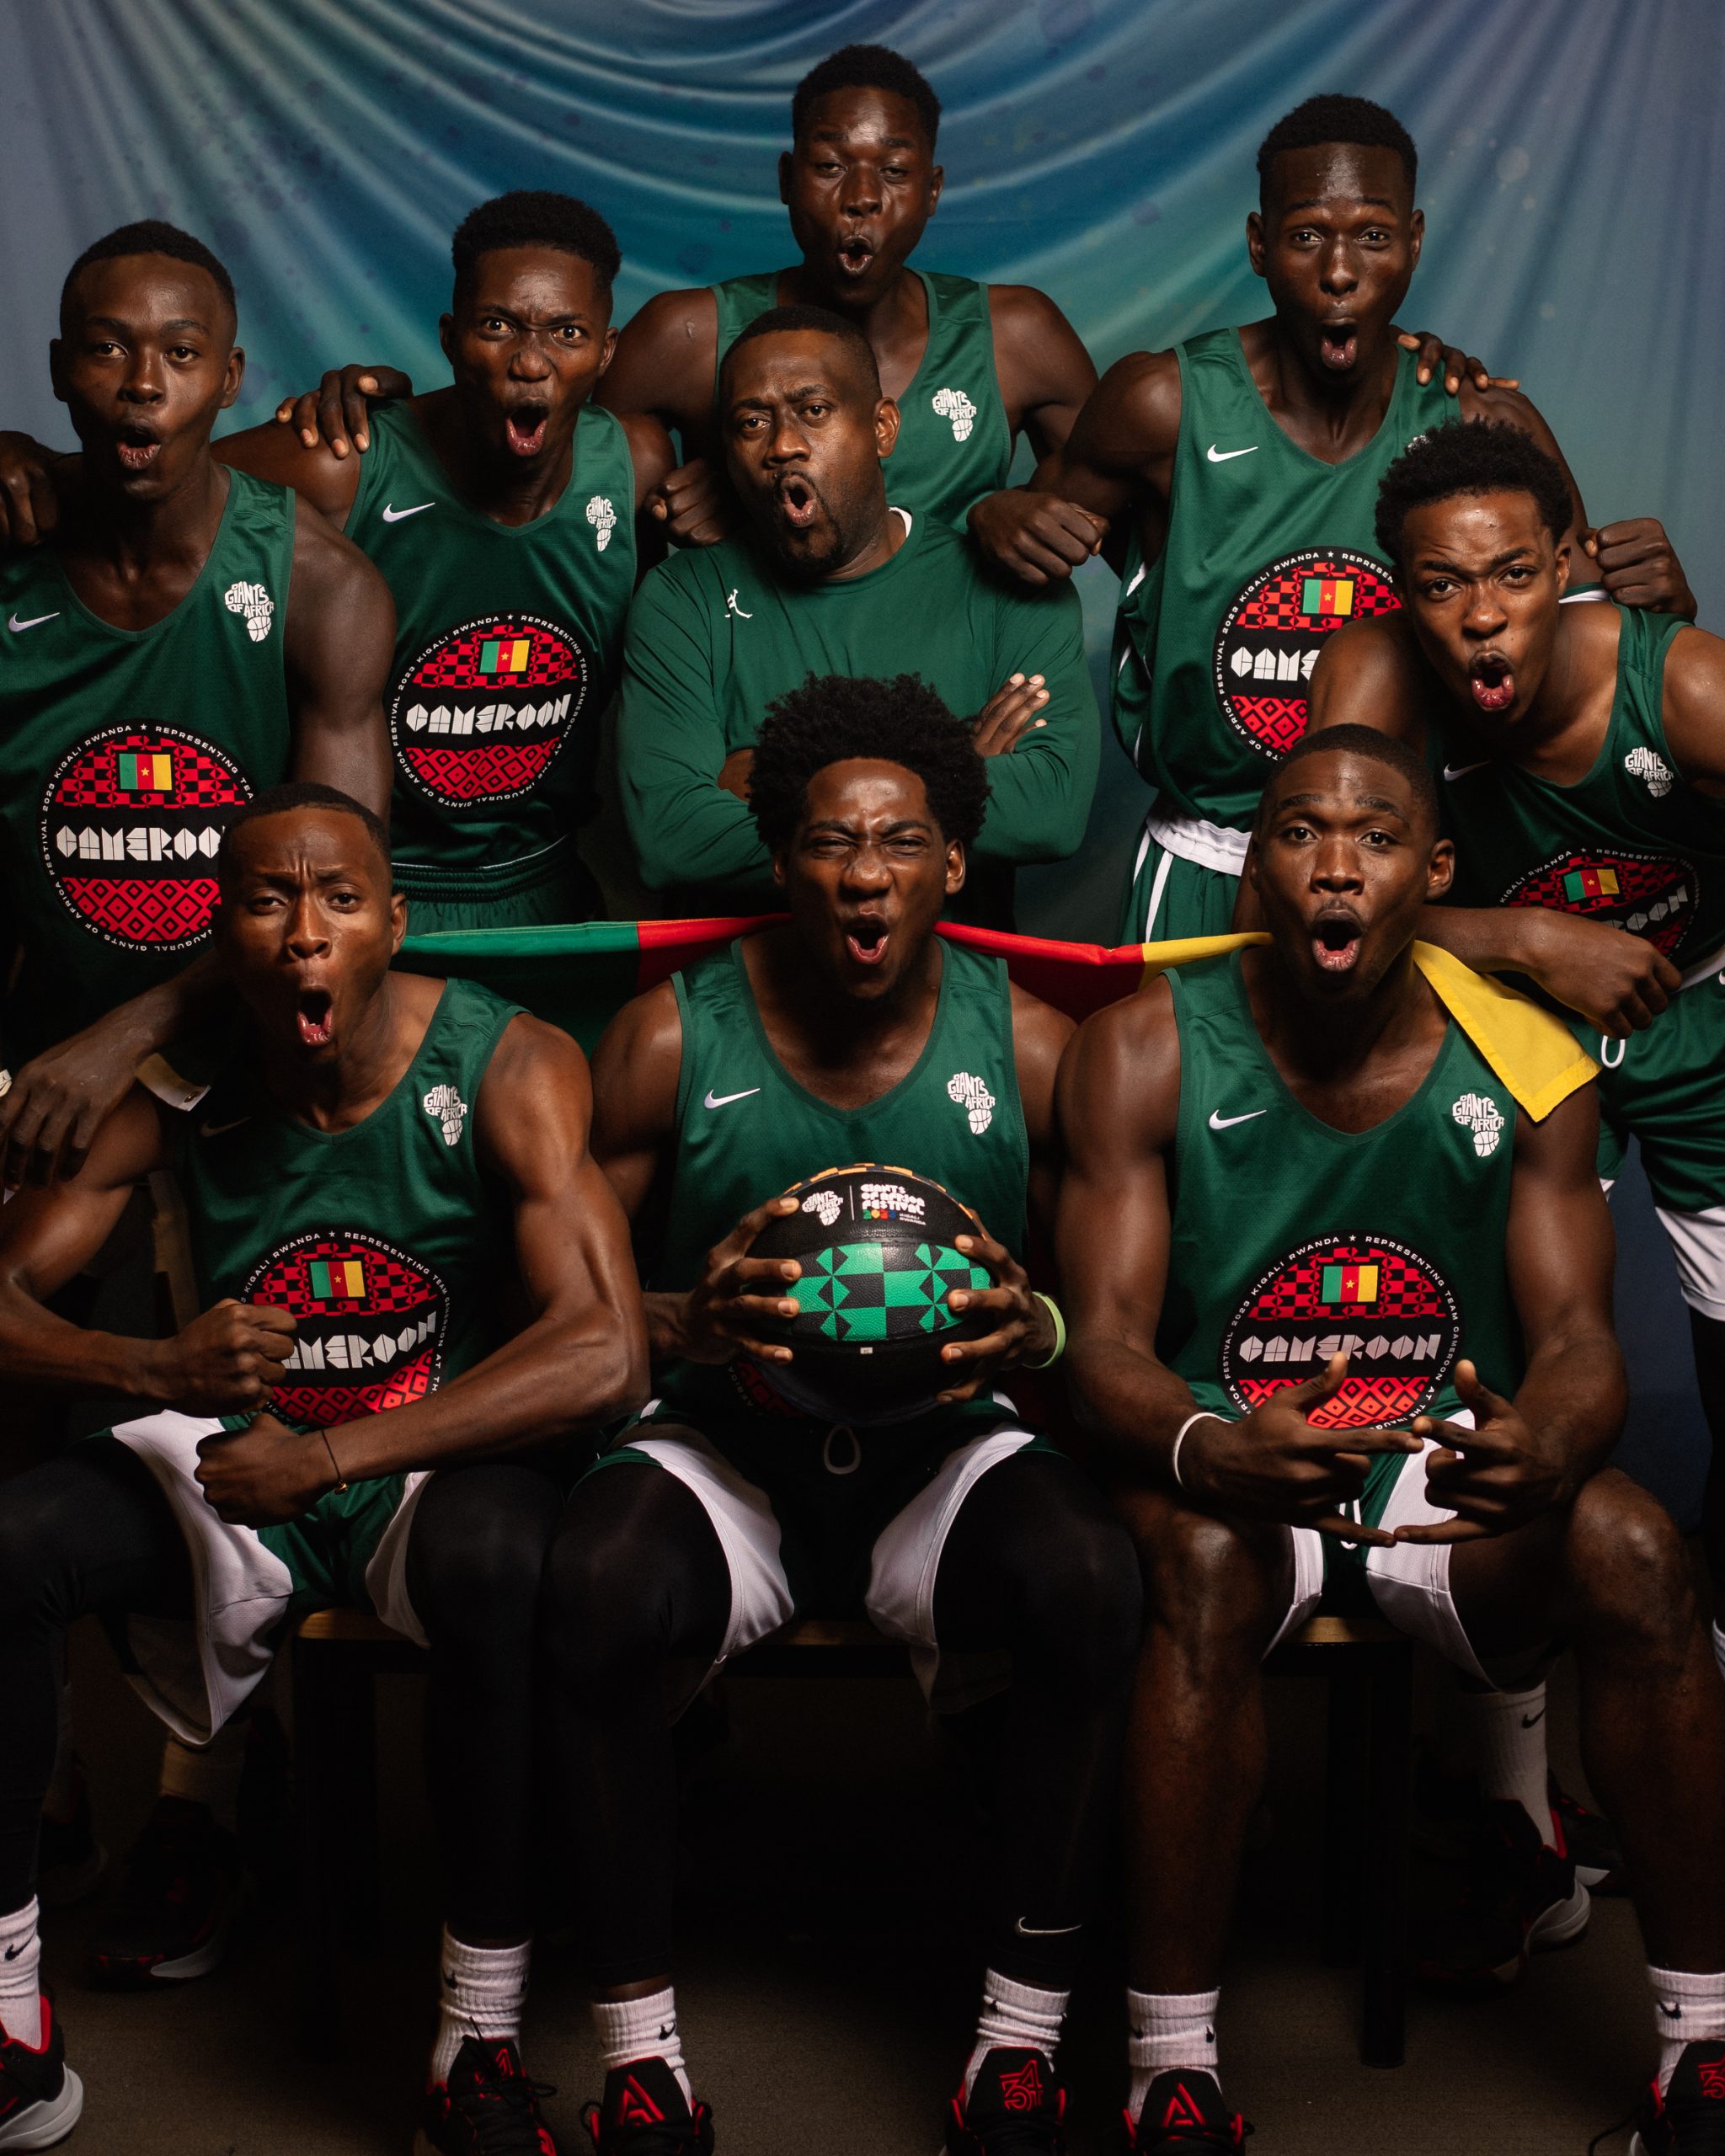 Giants of Africa is Helping Reshape the Narrative Around International Hoops